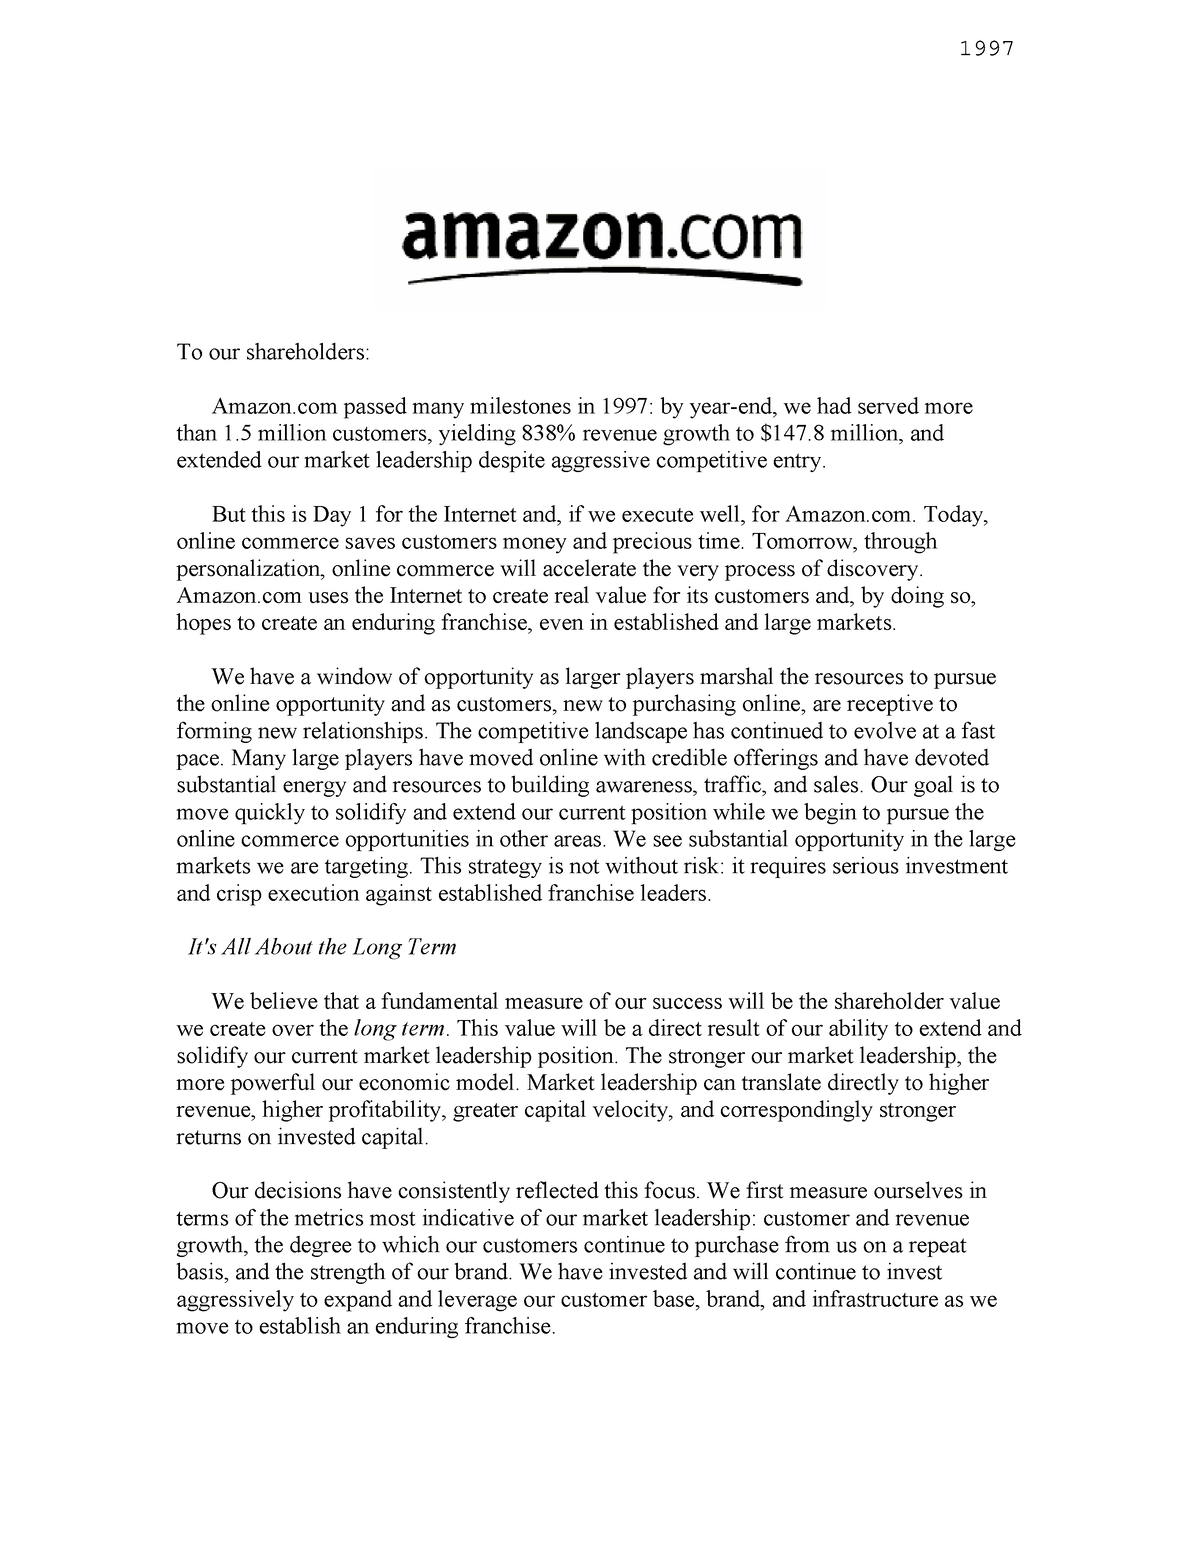 Jeff-bezos-amazon-shareholder-letters-1997 2020 - To our shareholders ...